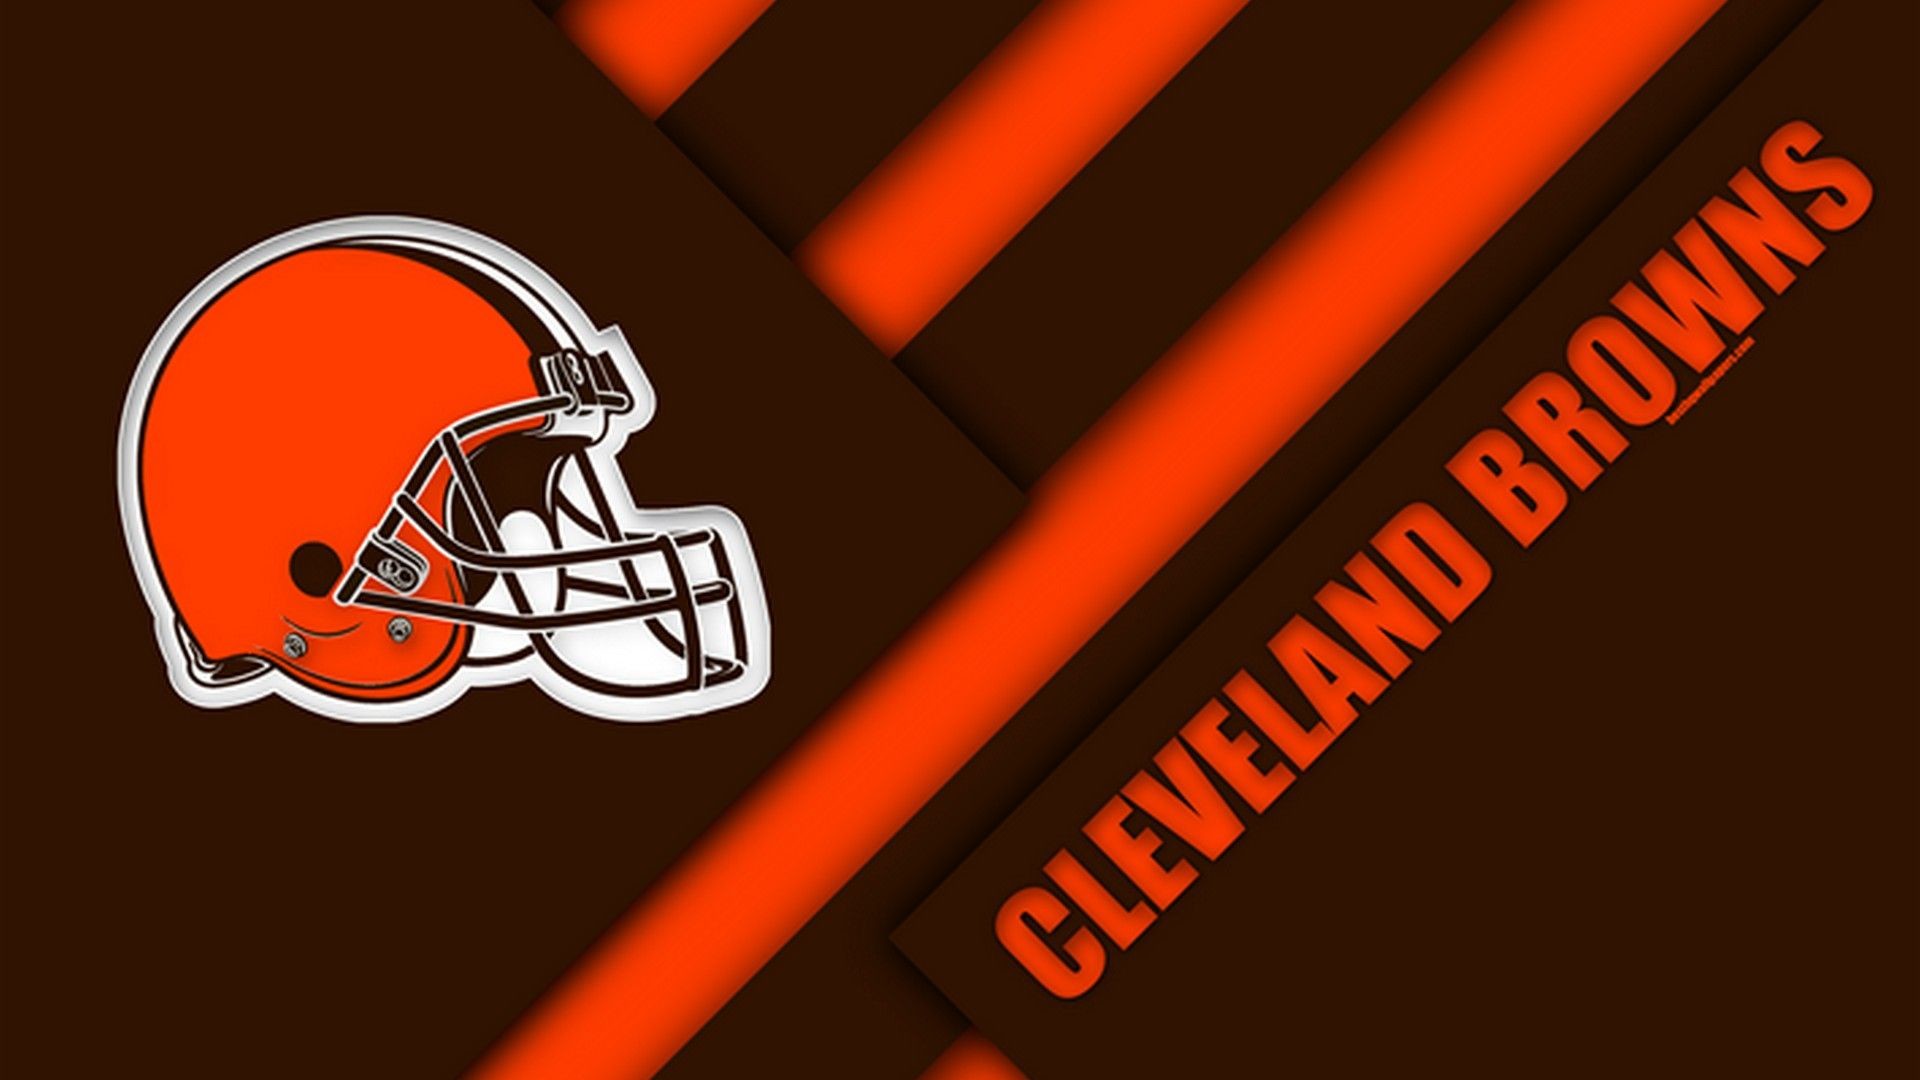 1920x1080 Cleveland Browns Desktop Wallpaper is best high definition wallpaper 2018.  You can make this wallpaper for your Mac or Windows Desktop Background,  iPhone, ...